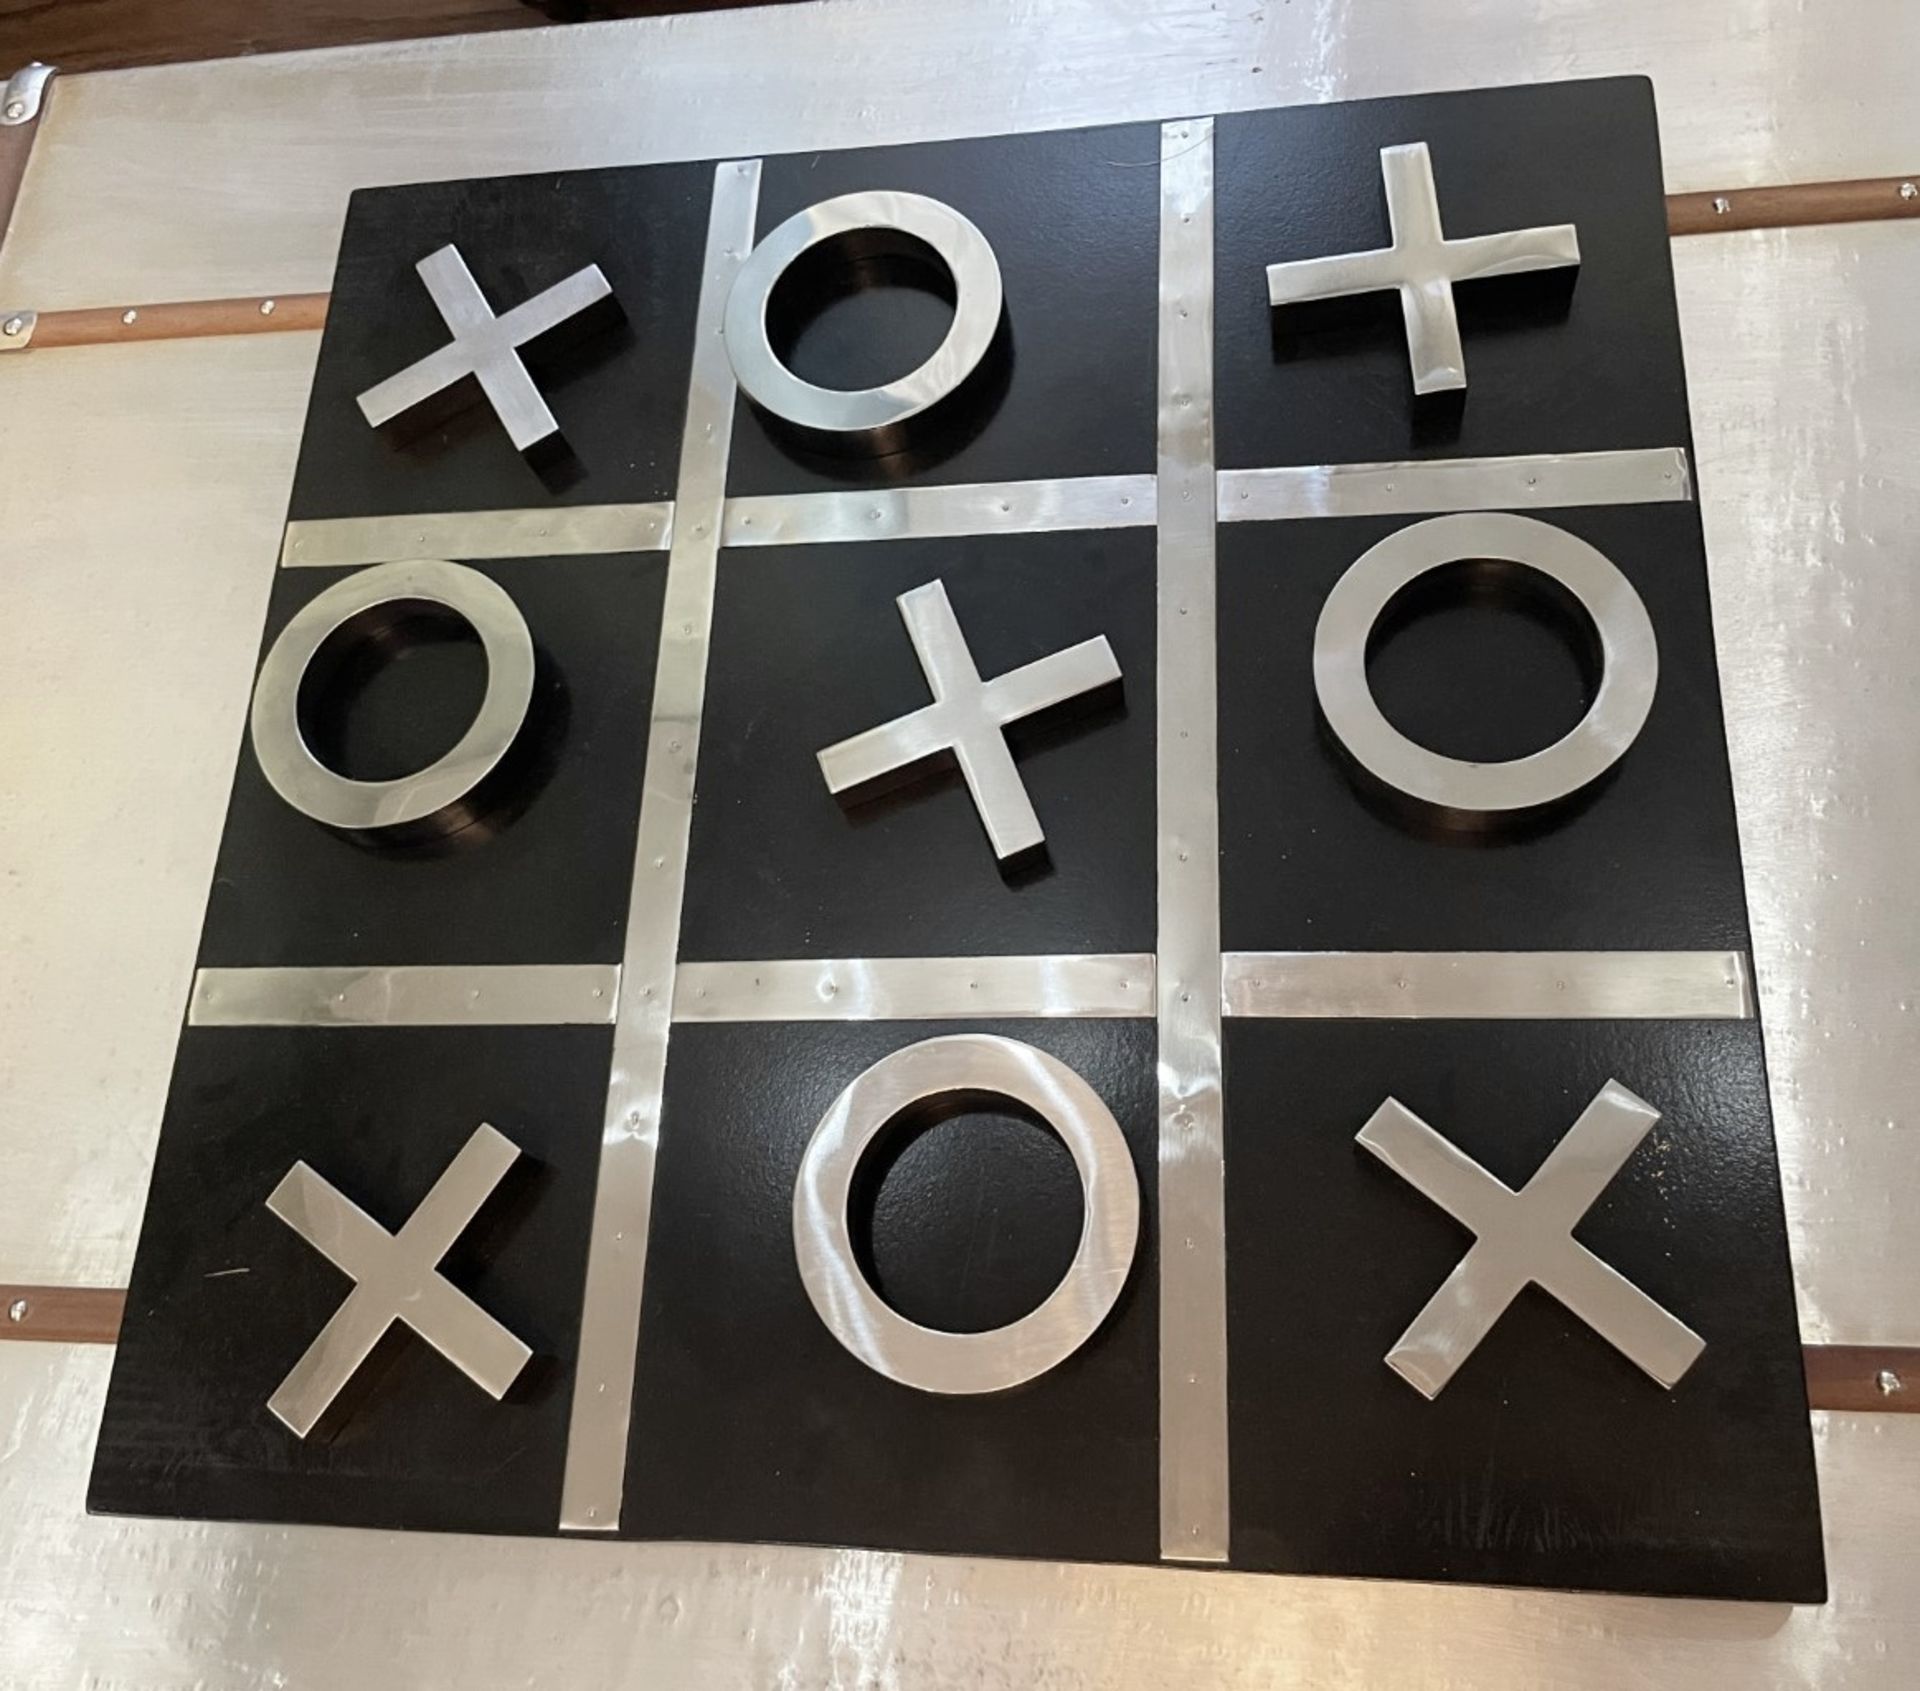 1 x Premium Noughts & Crosses Game Set - Recently Removed from a Luxury Furniture Retailer in Black